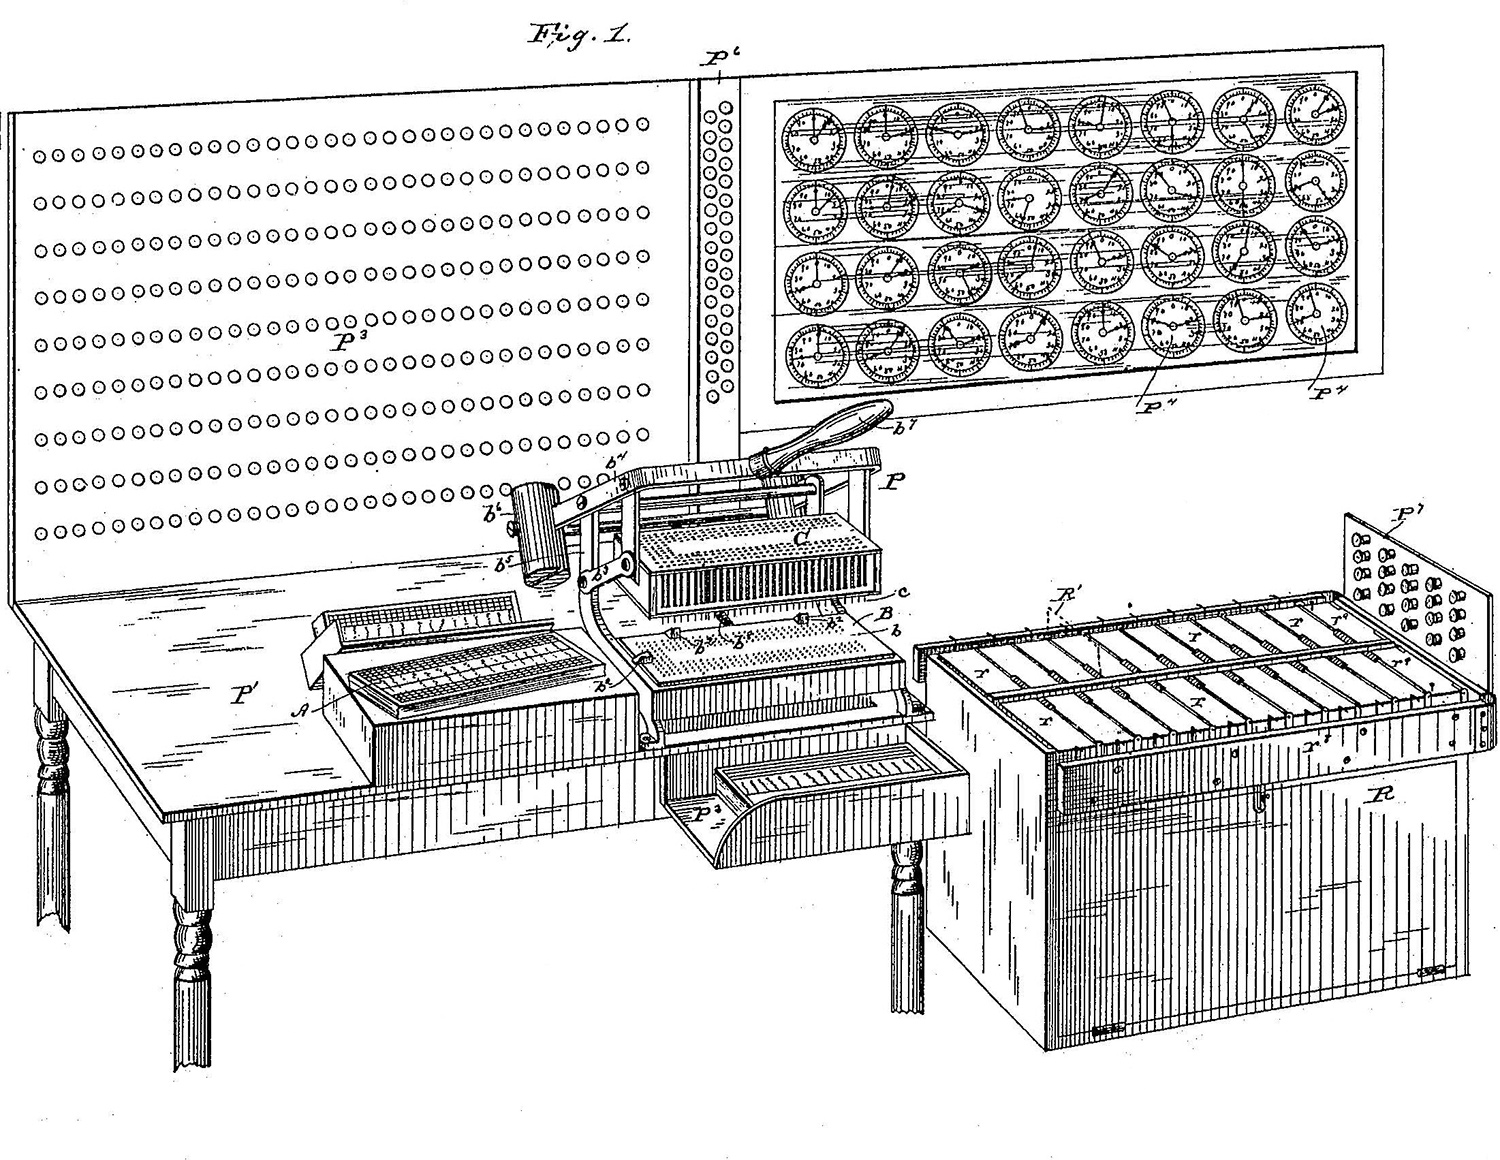 Black and white patent drawing of the Hollerith card puncher, tabulator, and sorting box